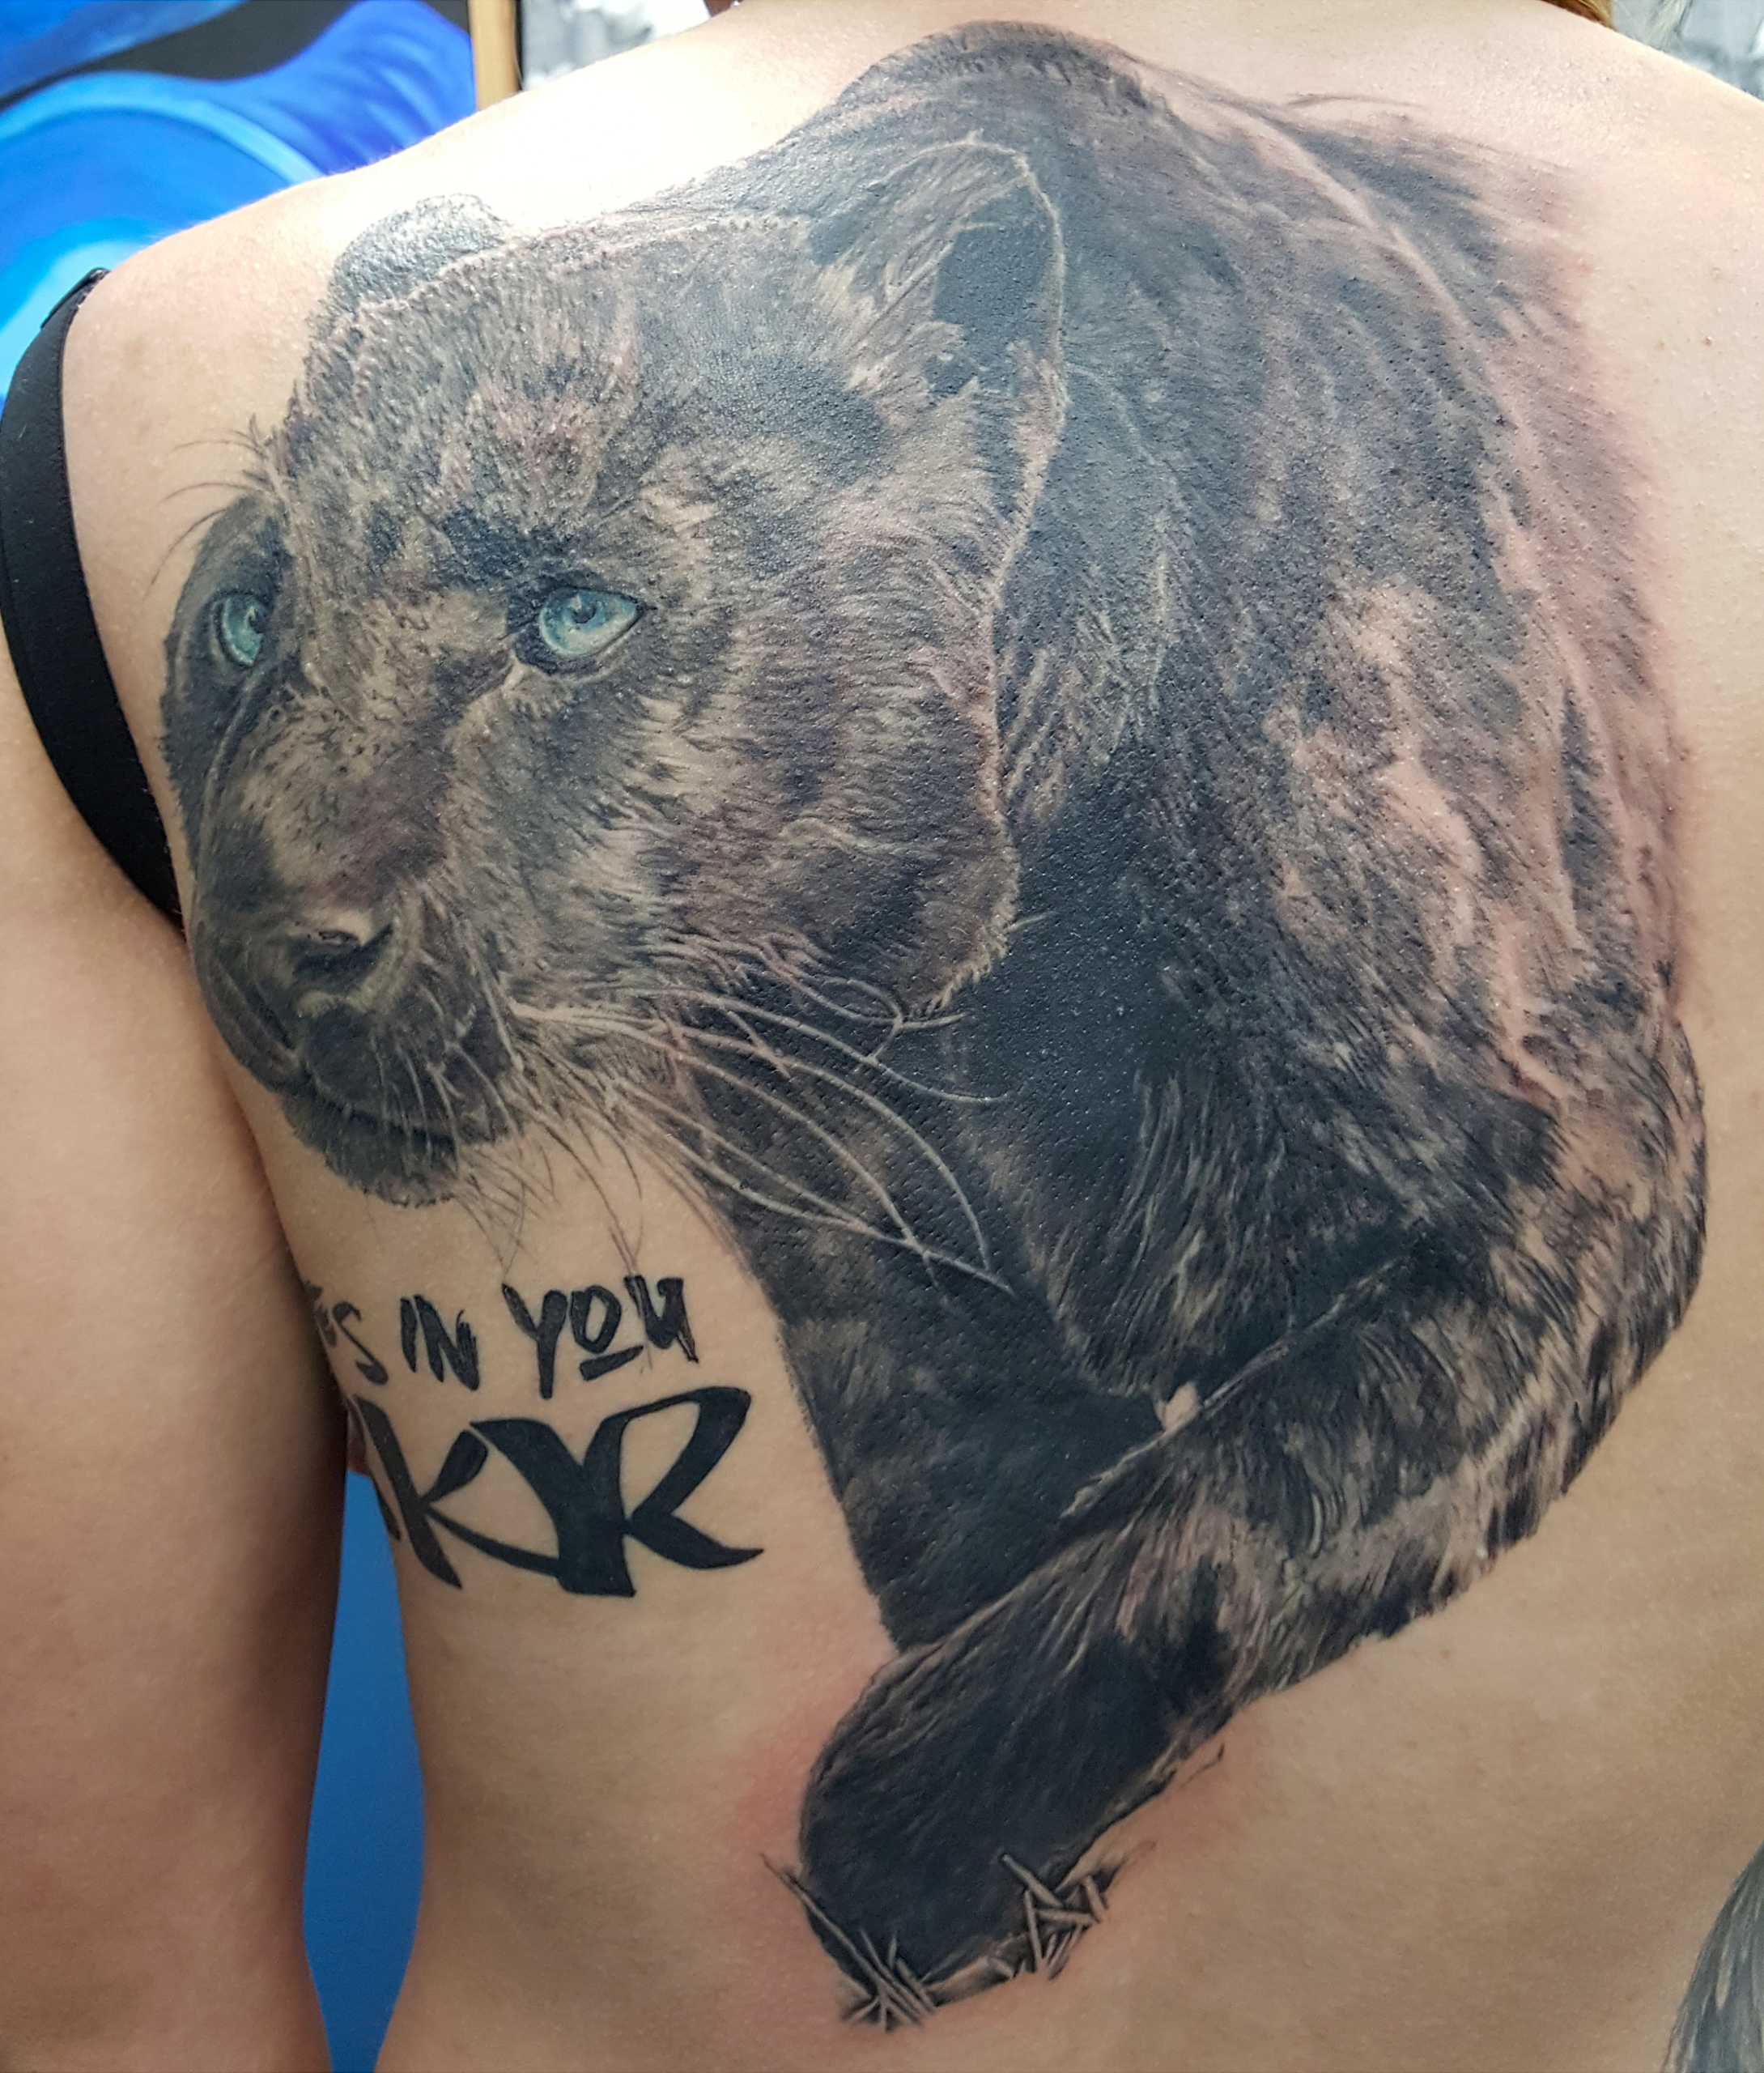 Realism in skin, half back tattoo of a prowling black panther.  Blue eyes are the only color in this realistic black and grey tattoo.